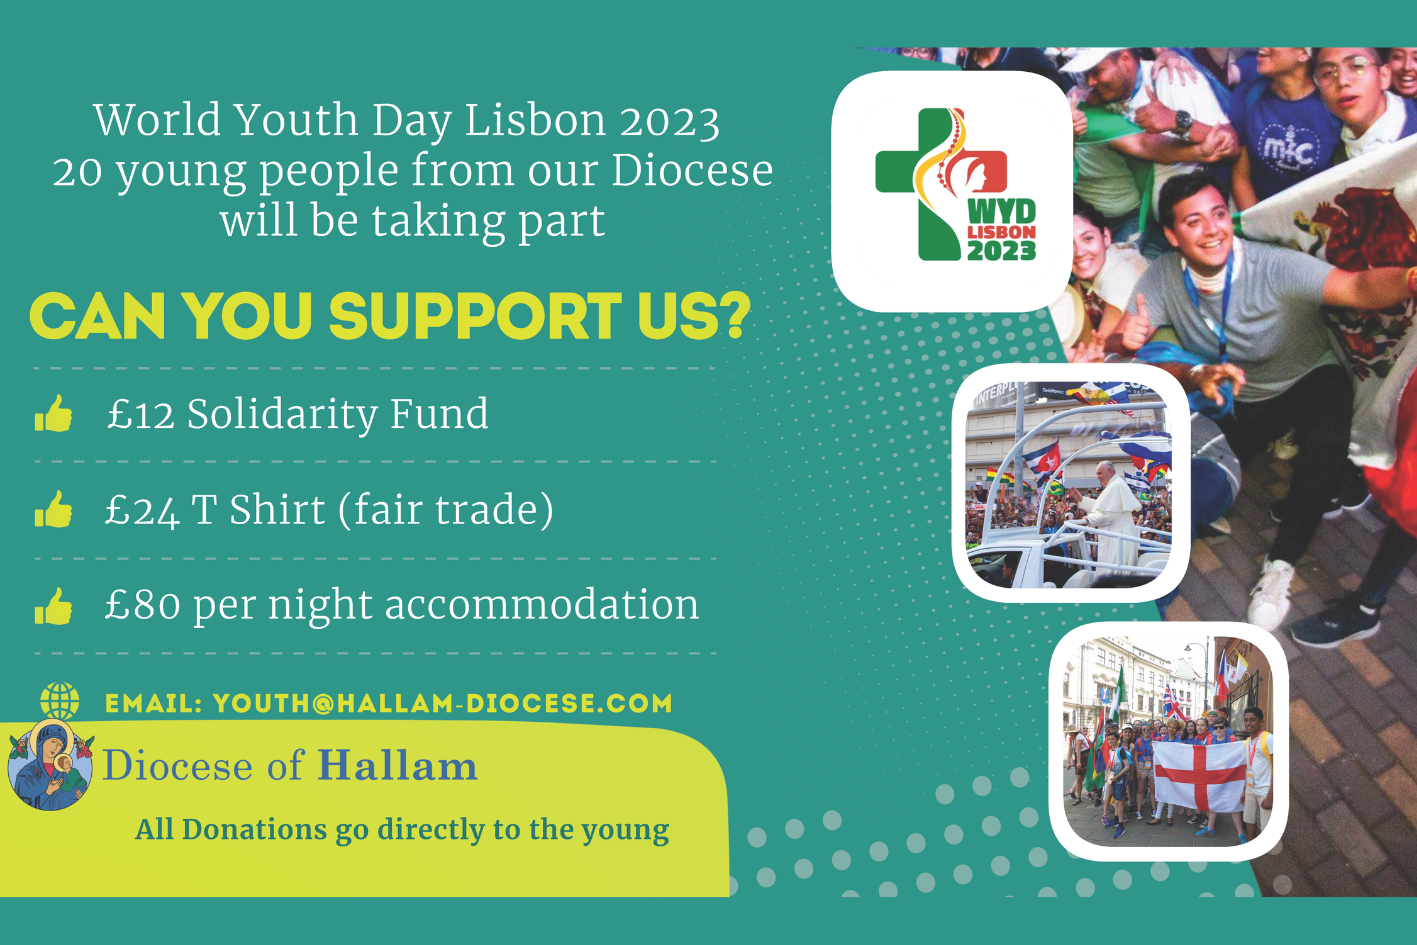 World Youth Day Lisbon 2023. 20 young people from our Diocese will be taking part. Can you support us?